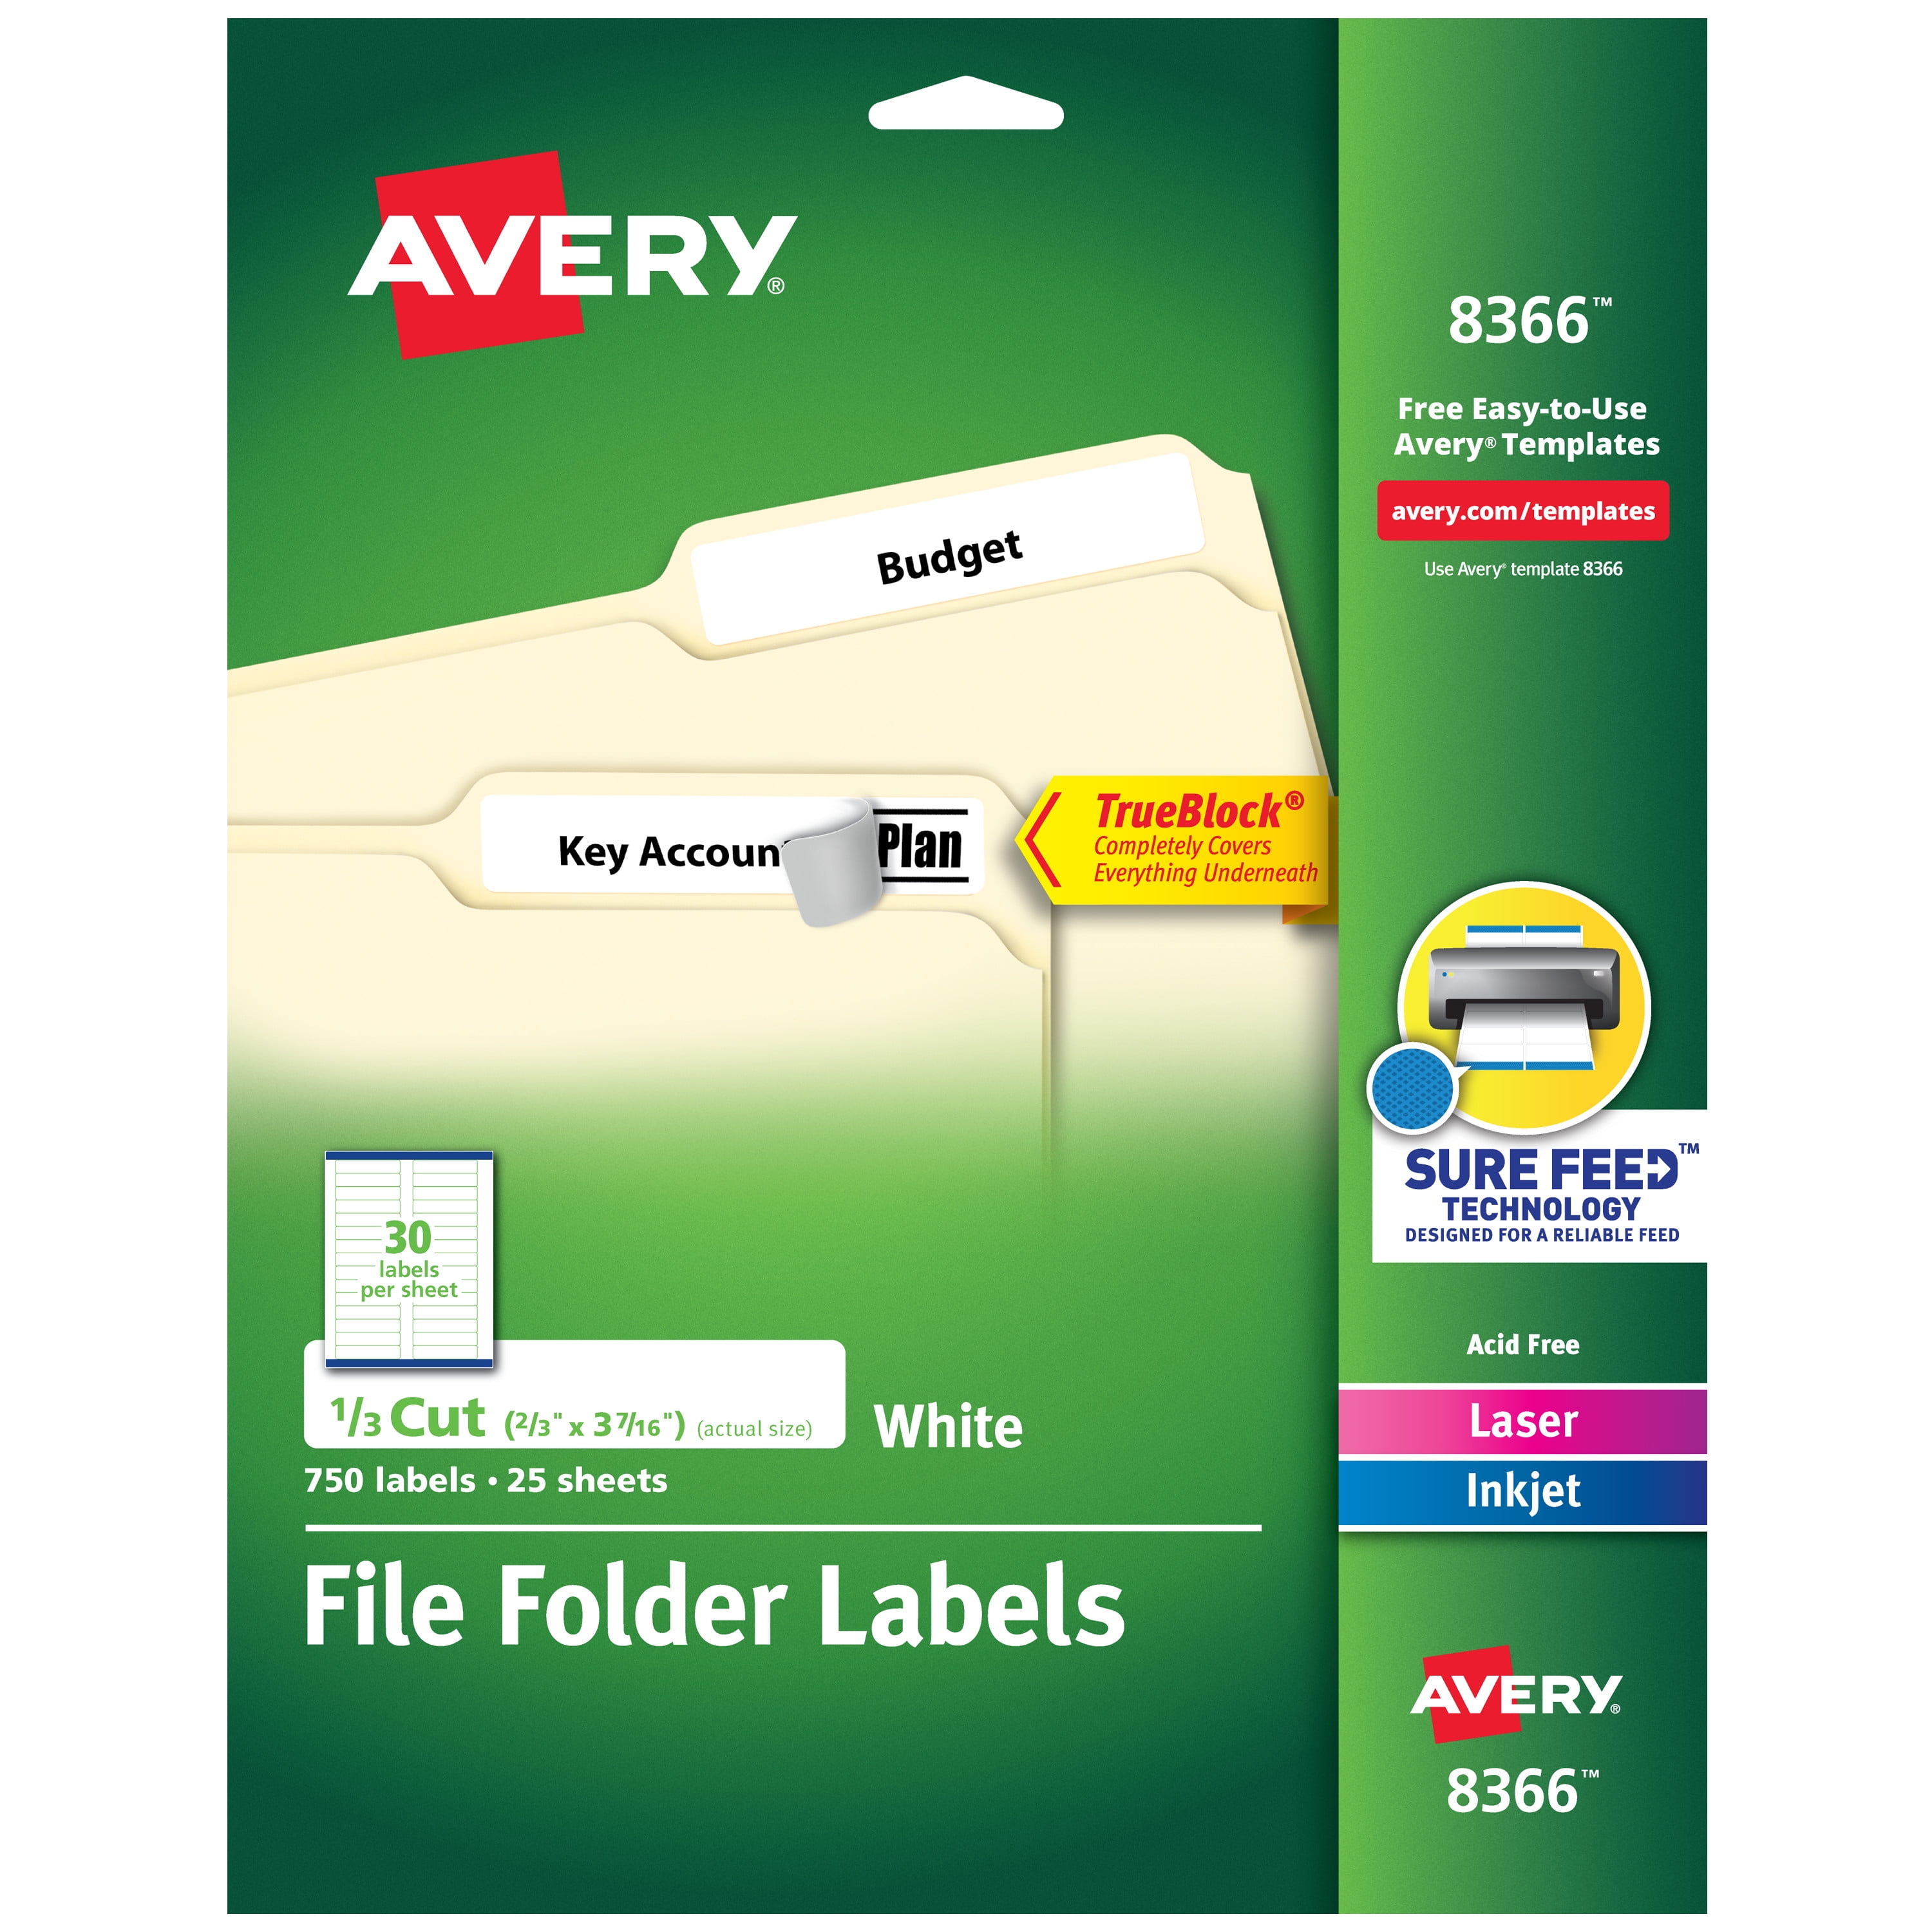 White 05202 1/3 Cut - 1 Pack of 252 Laser and Inkjet Printers Avery File Folder Labels 